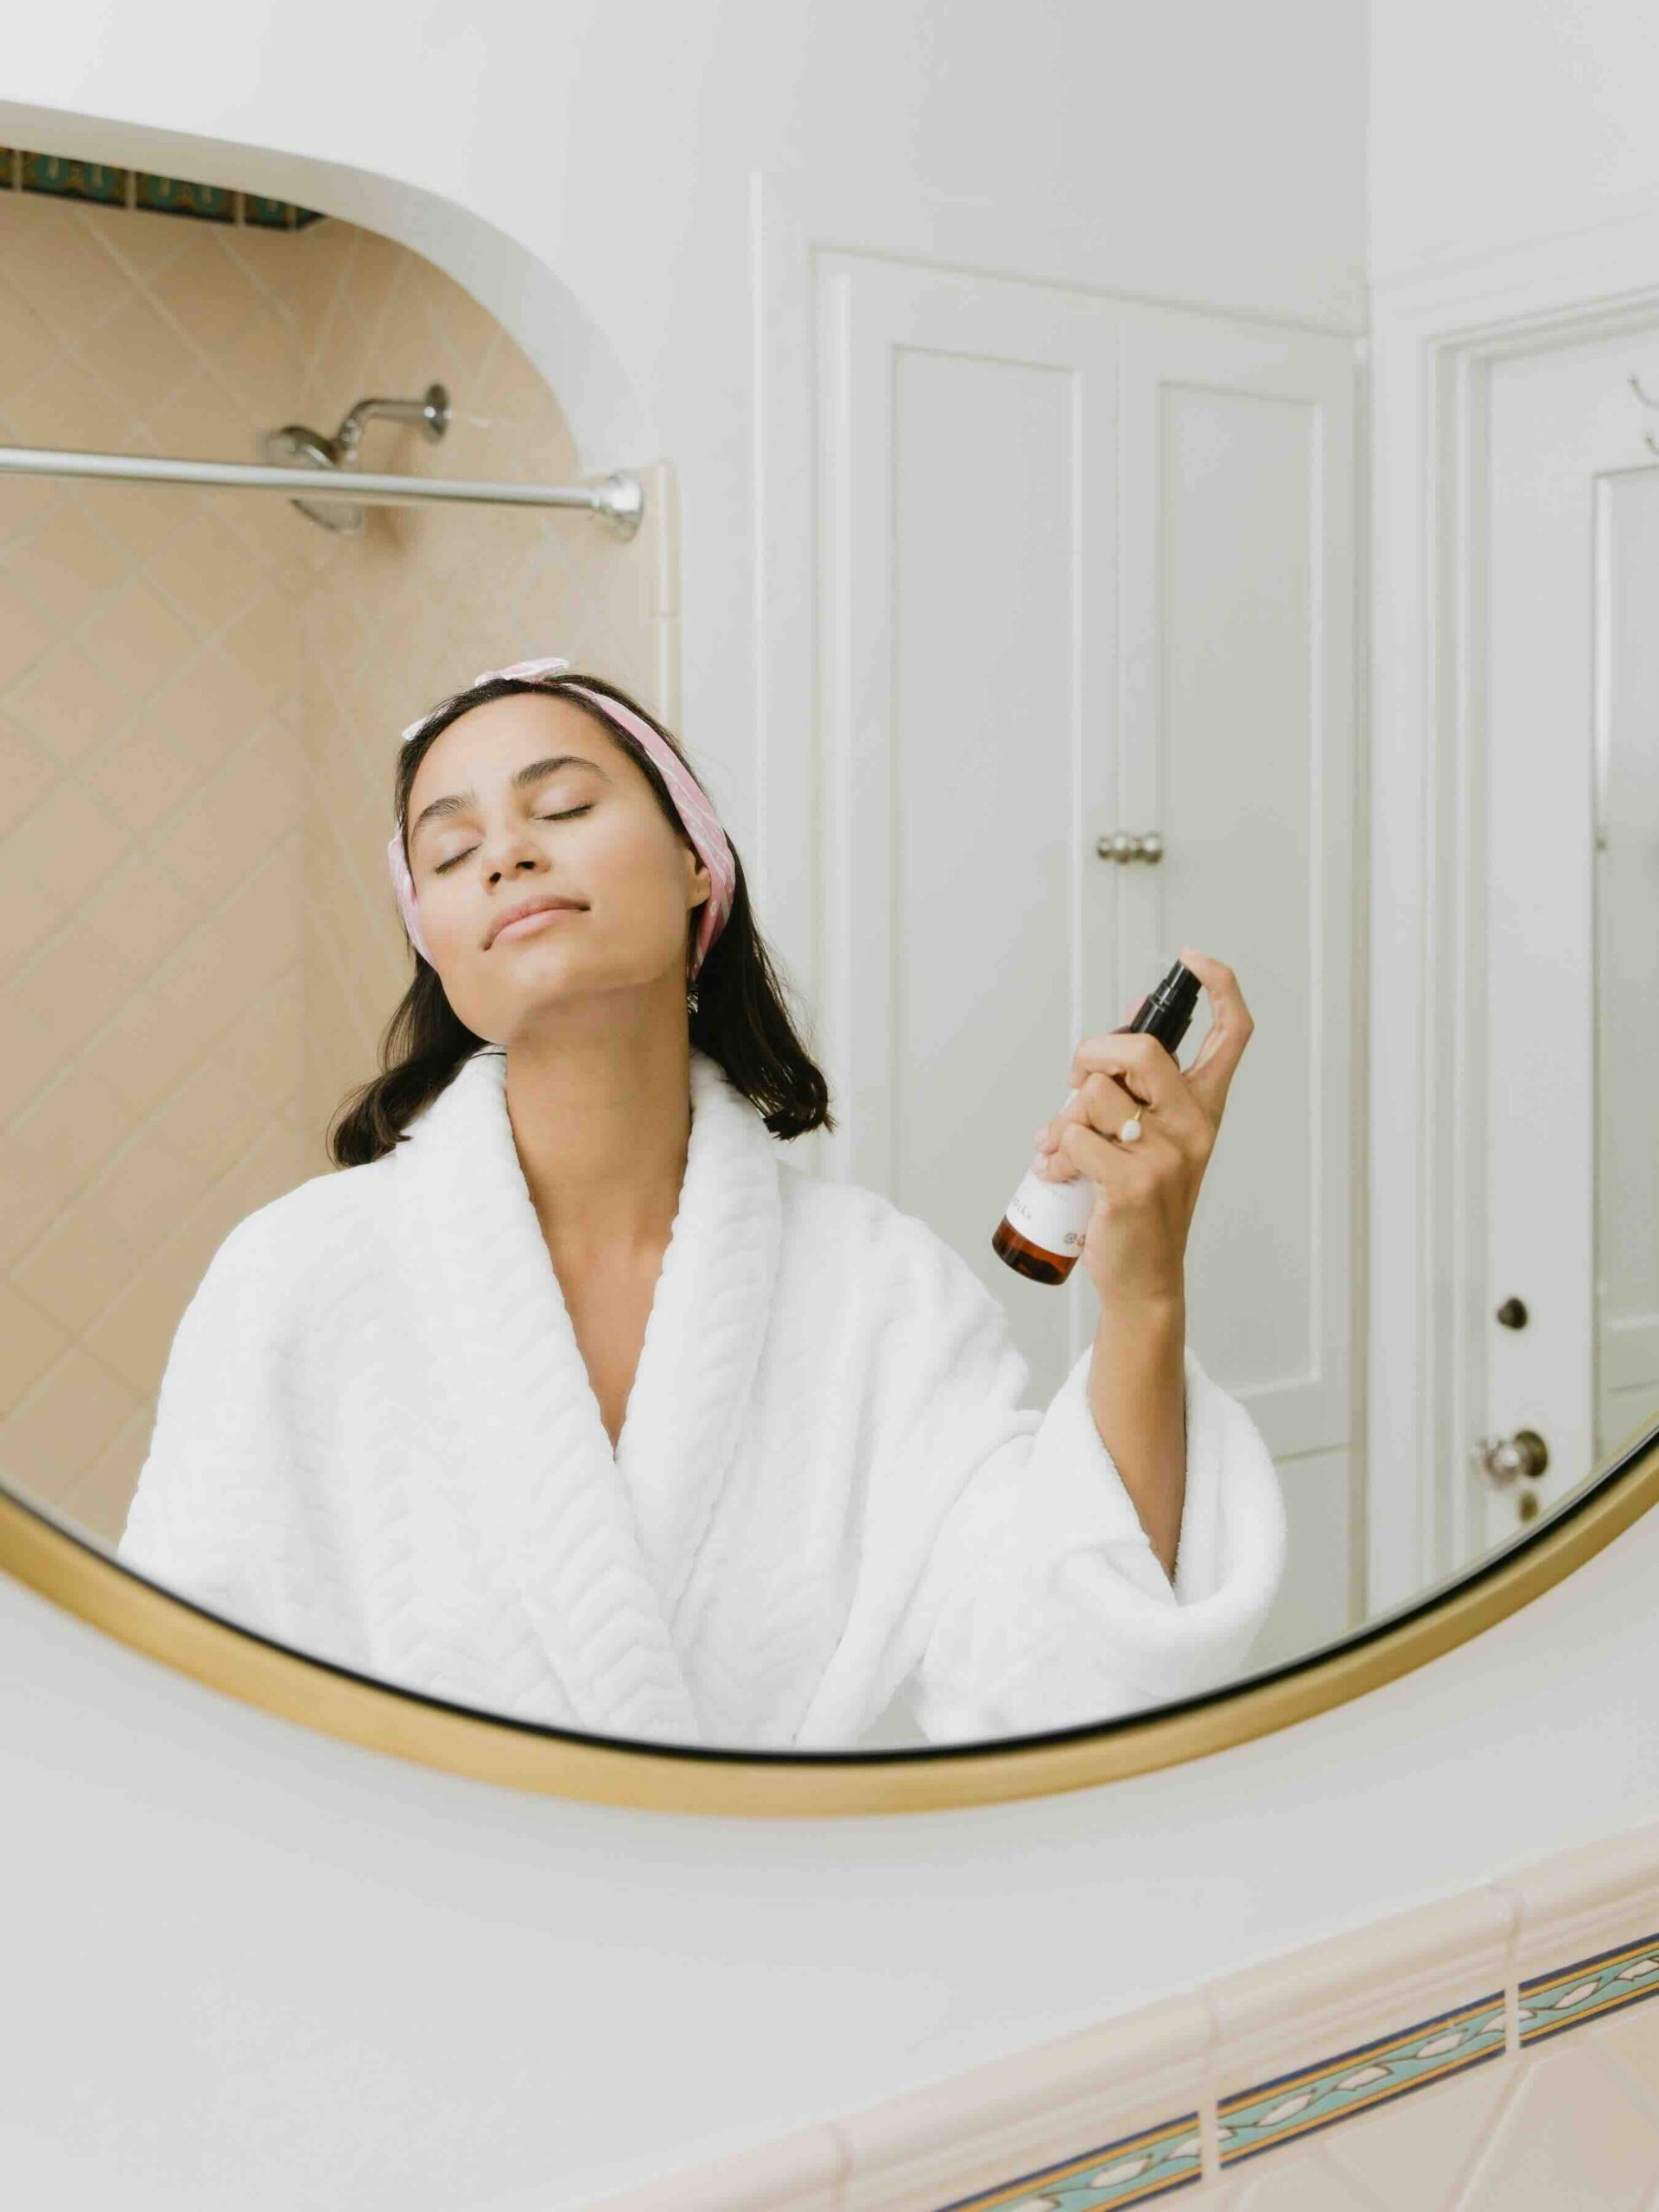 A woman in bathrobe spraying mist on her face as a part of her skincare routine